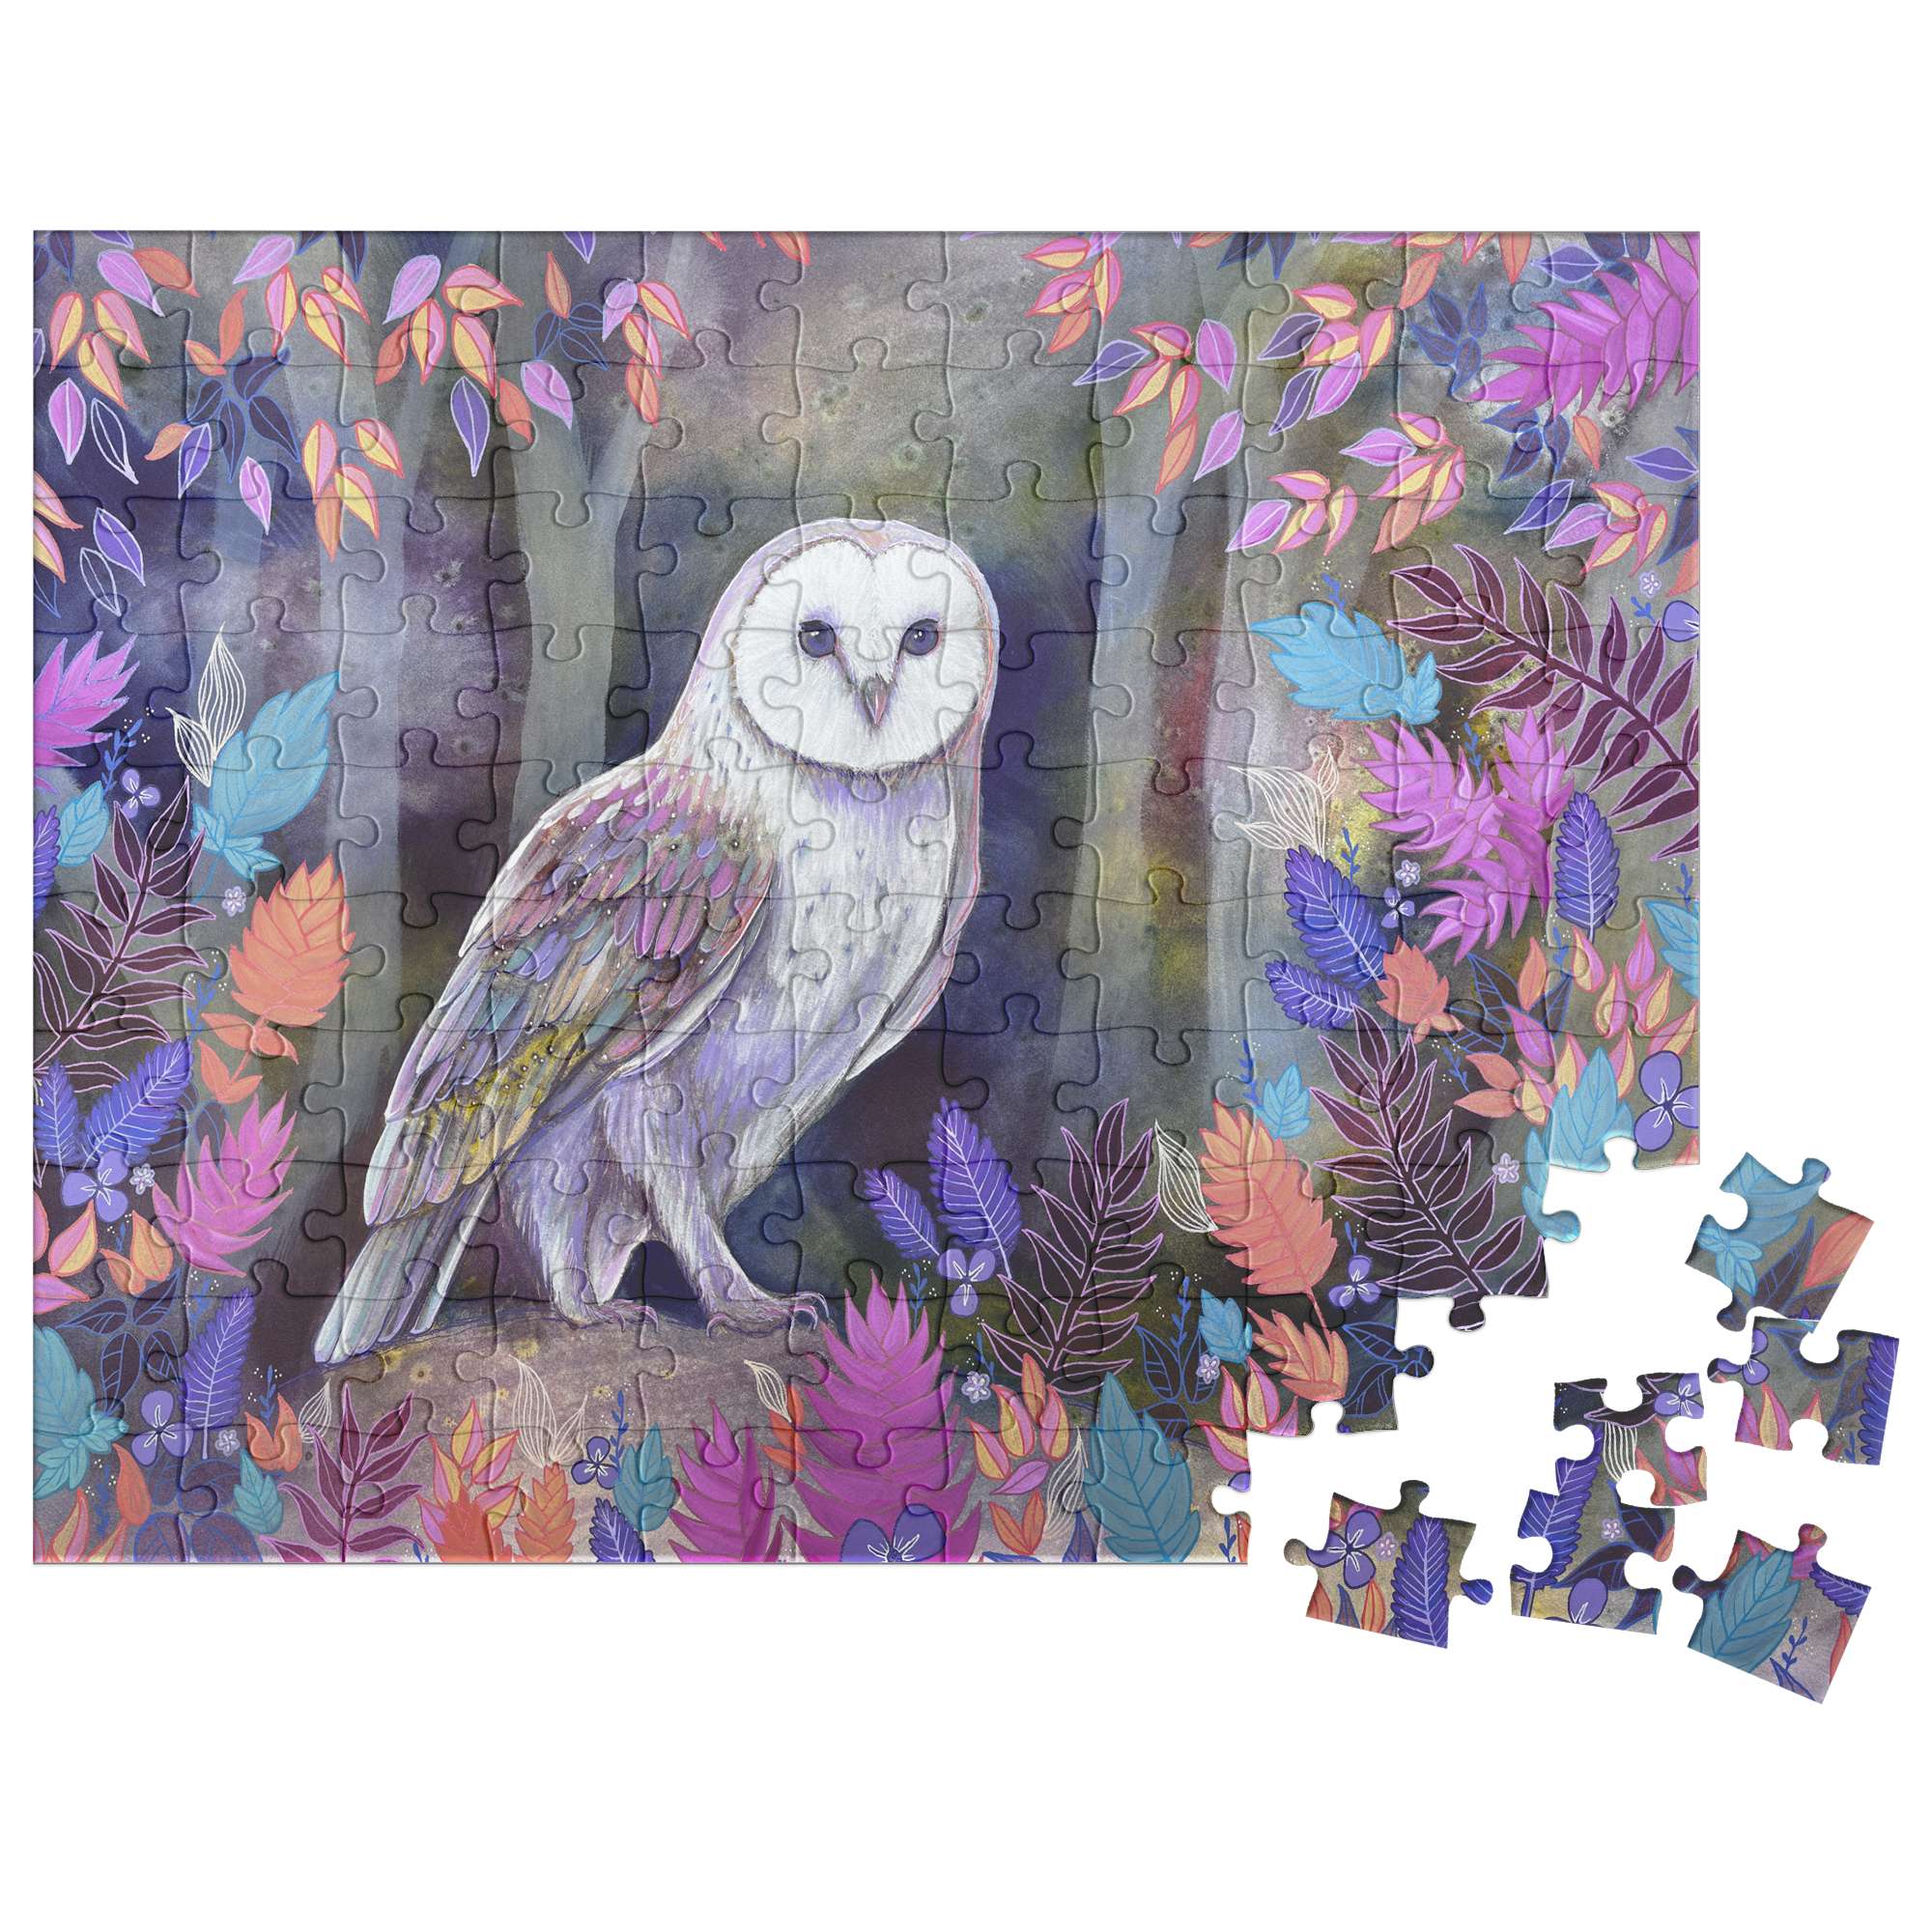 Owl Puzzle featuring a white owl perched on a branch, surrounded by colorful leaves, with one piece disconnected on the side.